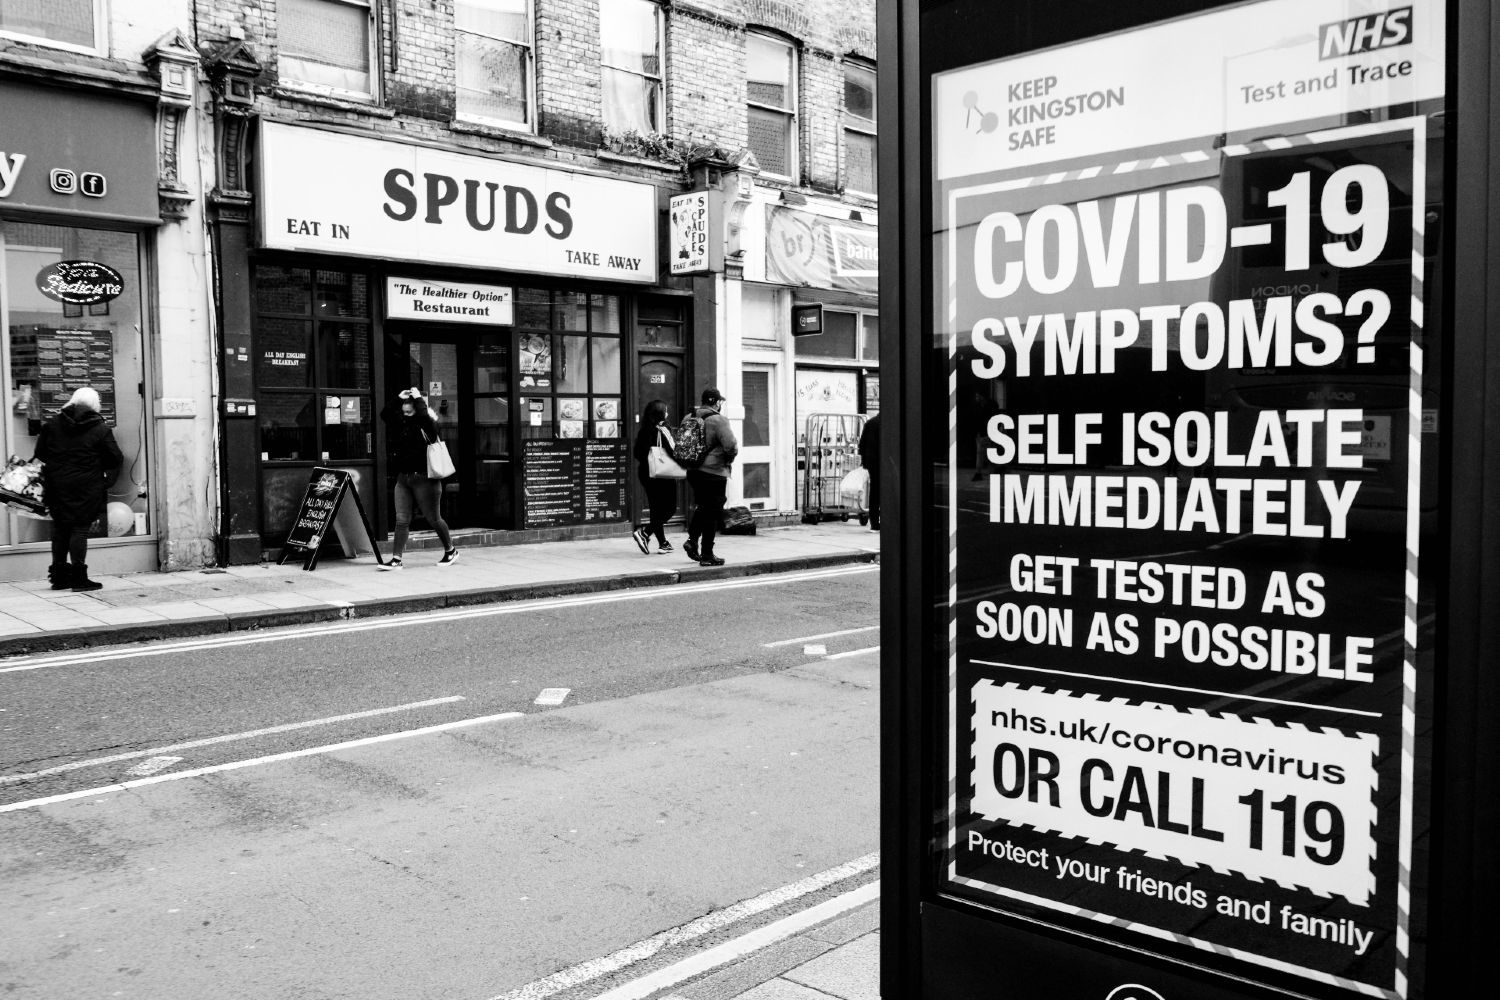 A sign on a UK street encourages people with COVID-19 symptoms to self-isolate immediately and get tested as soon as possible - test and trace data